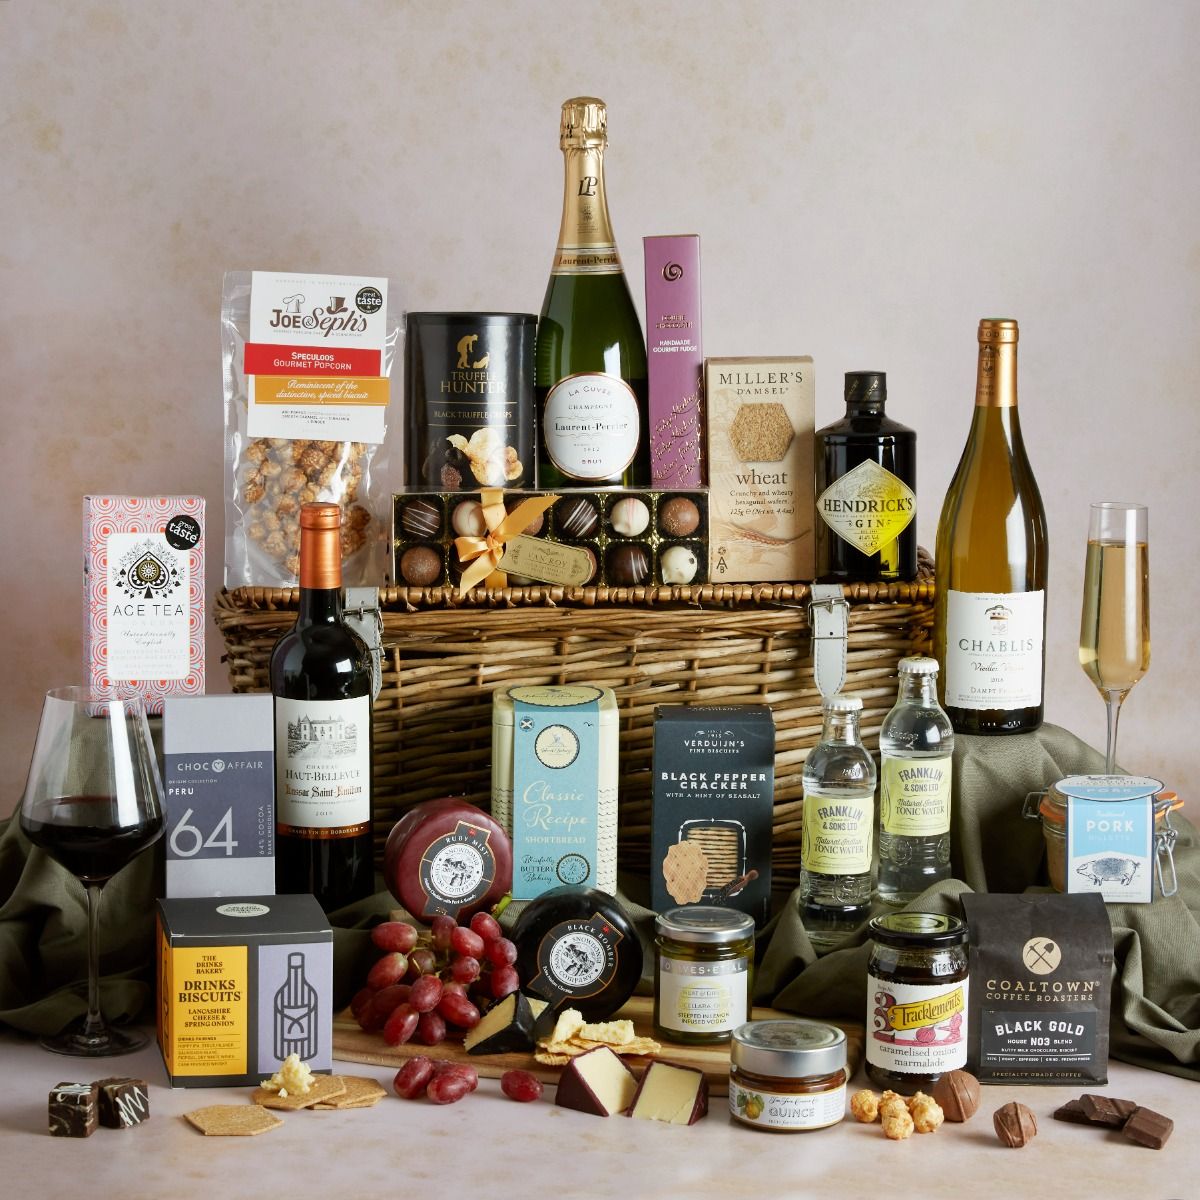  Mother's Day Grand Food & Wine Hamper with contents on display